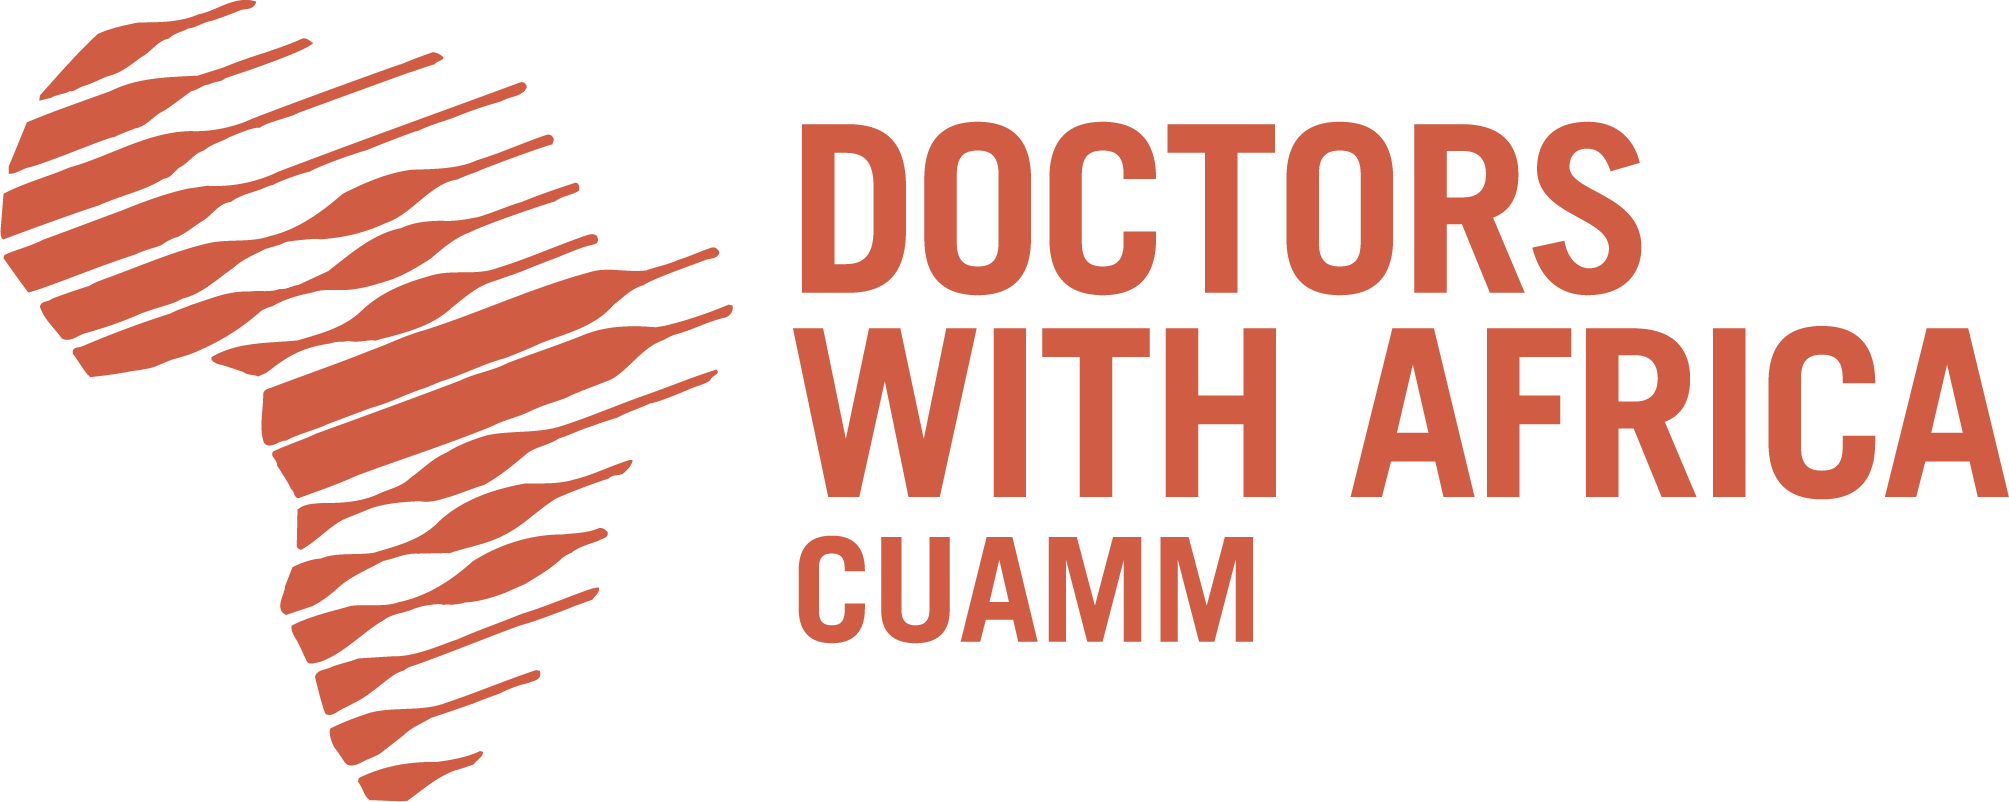 Doctors with Africa CUAMM Jobs 2021